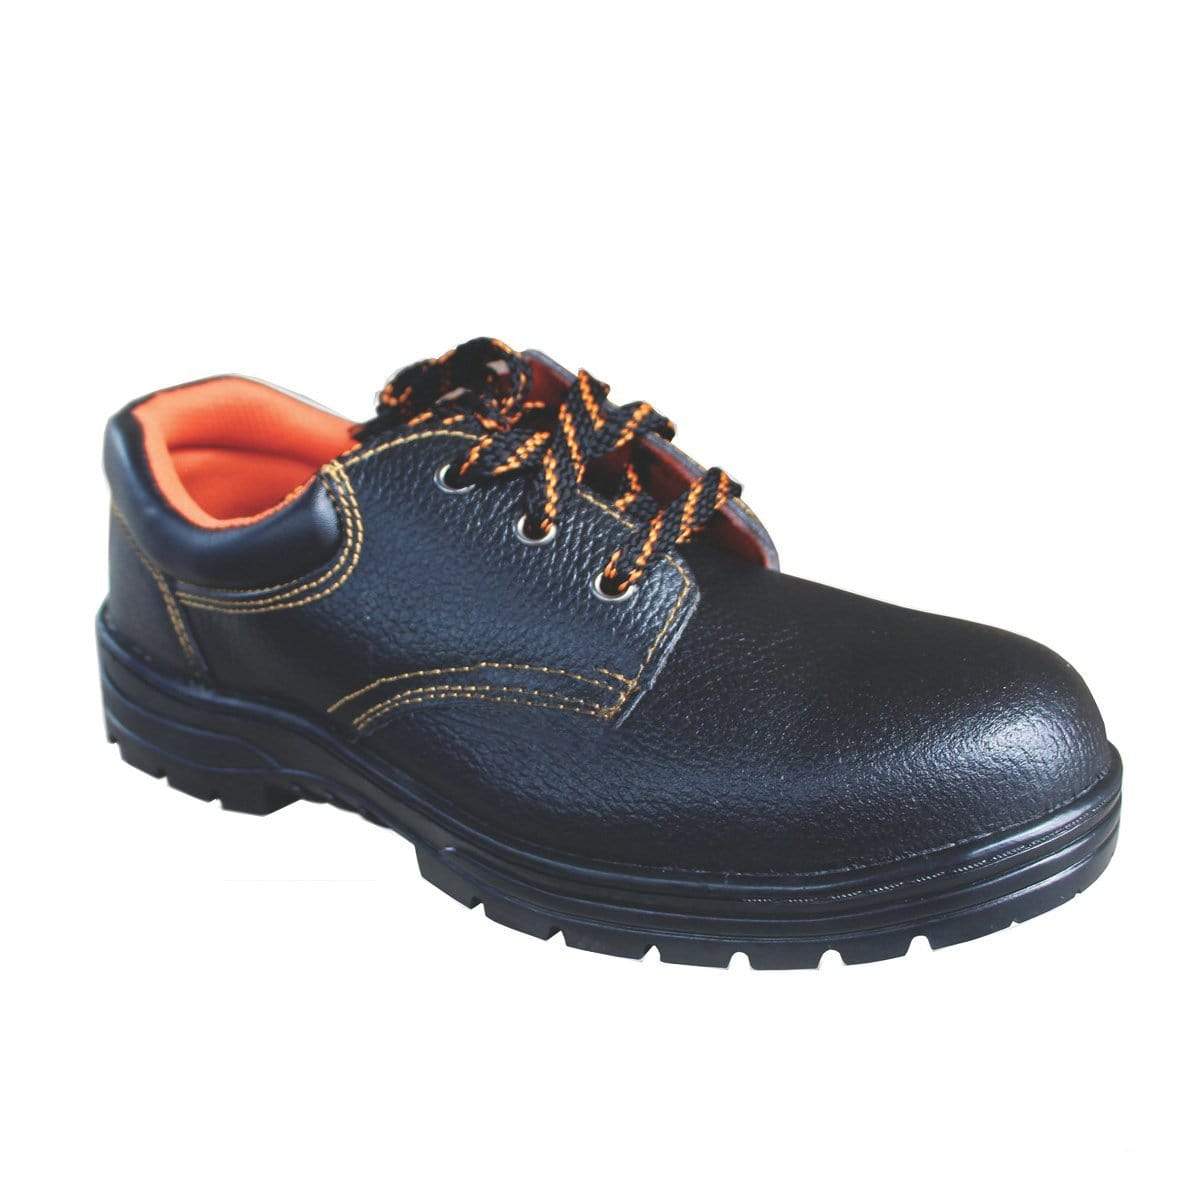 Sobar Industrial Grade Leather Safety Shoes - Malaysia Hardware Store